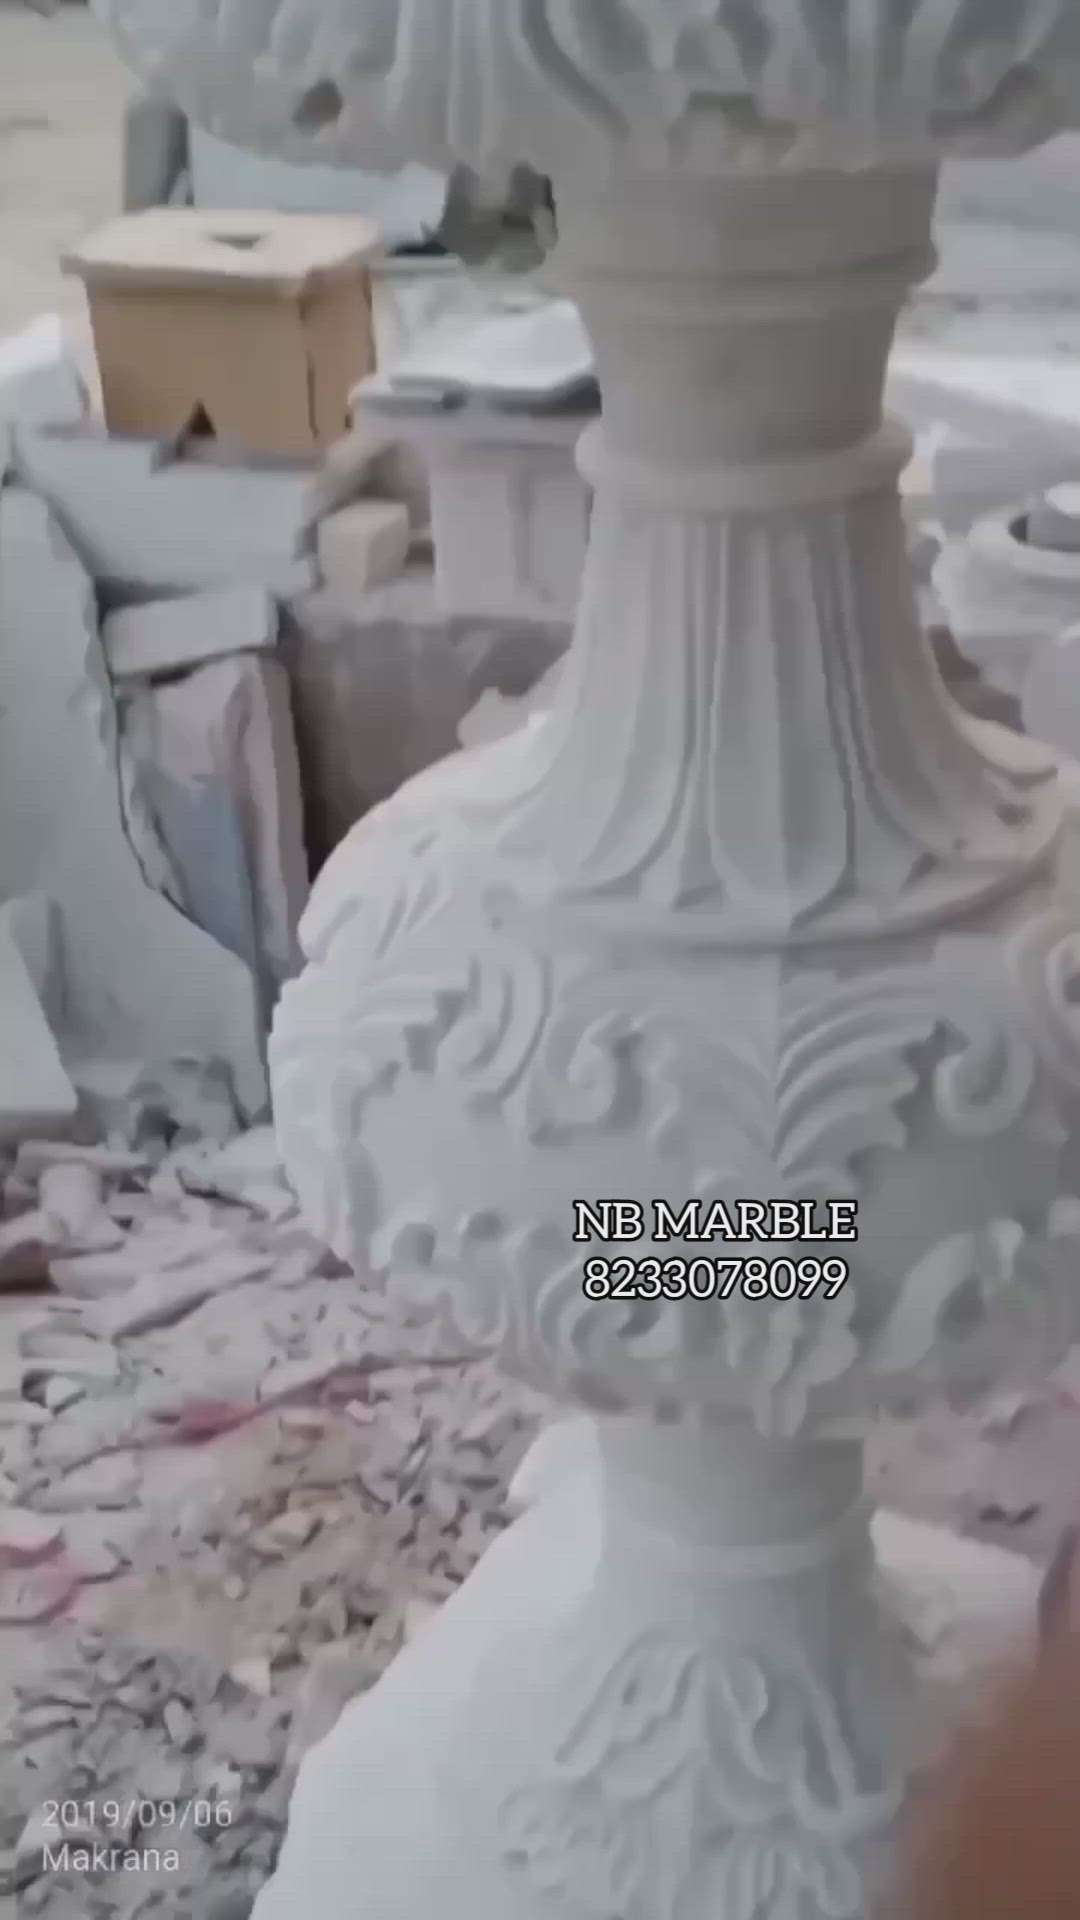 White Marble Carving Flower Pot

Decor your garden and home entrance with beautiful flower pot

We are manufacturer of marble and sandstone flower pots

We make any design according to your requirement and size

Follow me on Instagram
@nbmarble

More Information Contact Me
8233078099

#flowerpot #marbleflowerpot #nbmarble #whitemarble #gardendecor #gardensofinstagram #gardeninspiration